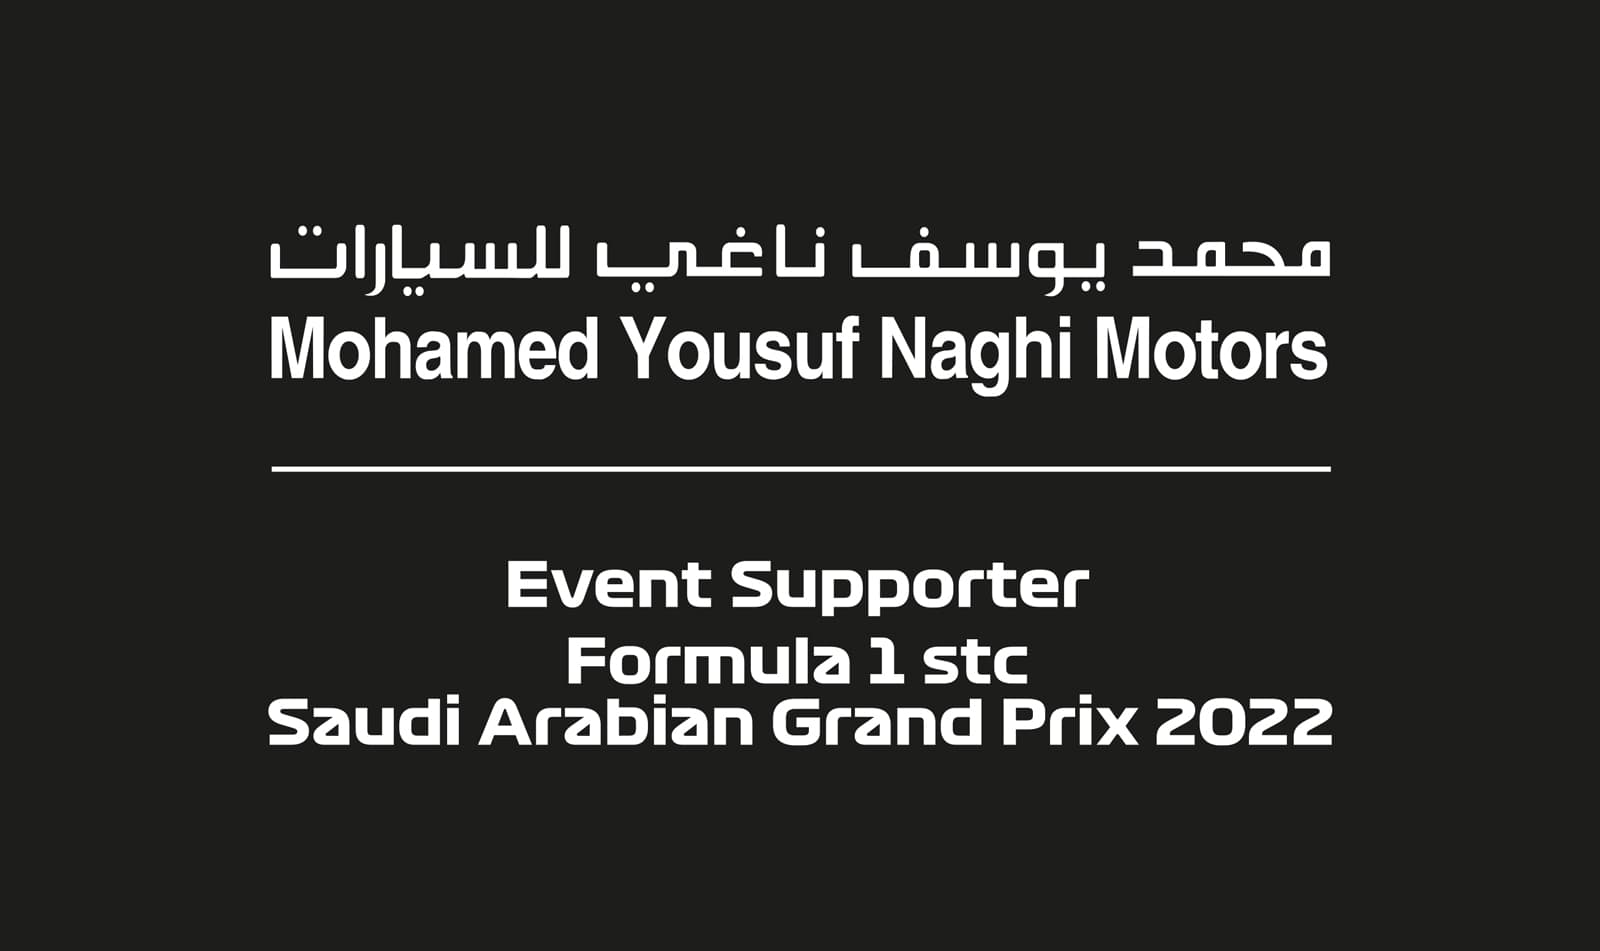 Mohamed Yousuf Naghi Announced as Official Sponsor of the FORMULA 1 STC SAUDI ARABIAN GRAND PRIX 2022